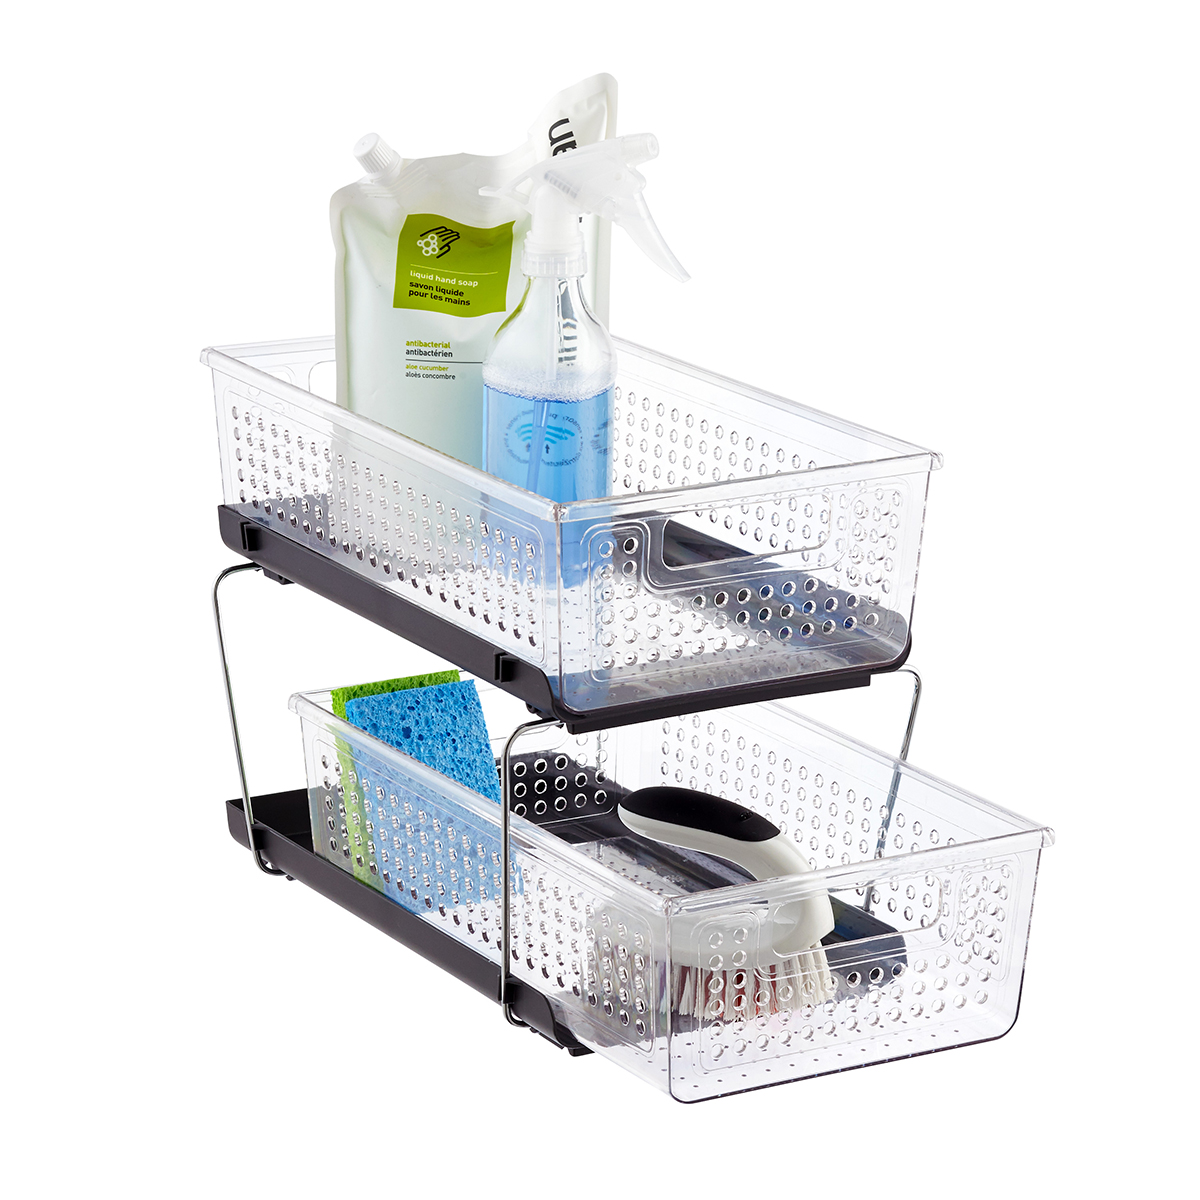 Madesmart madesmart 2-tier organizer with dividers-bath collection